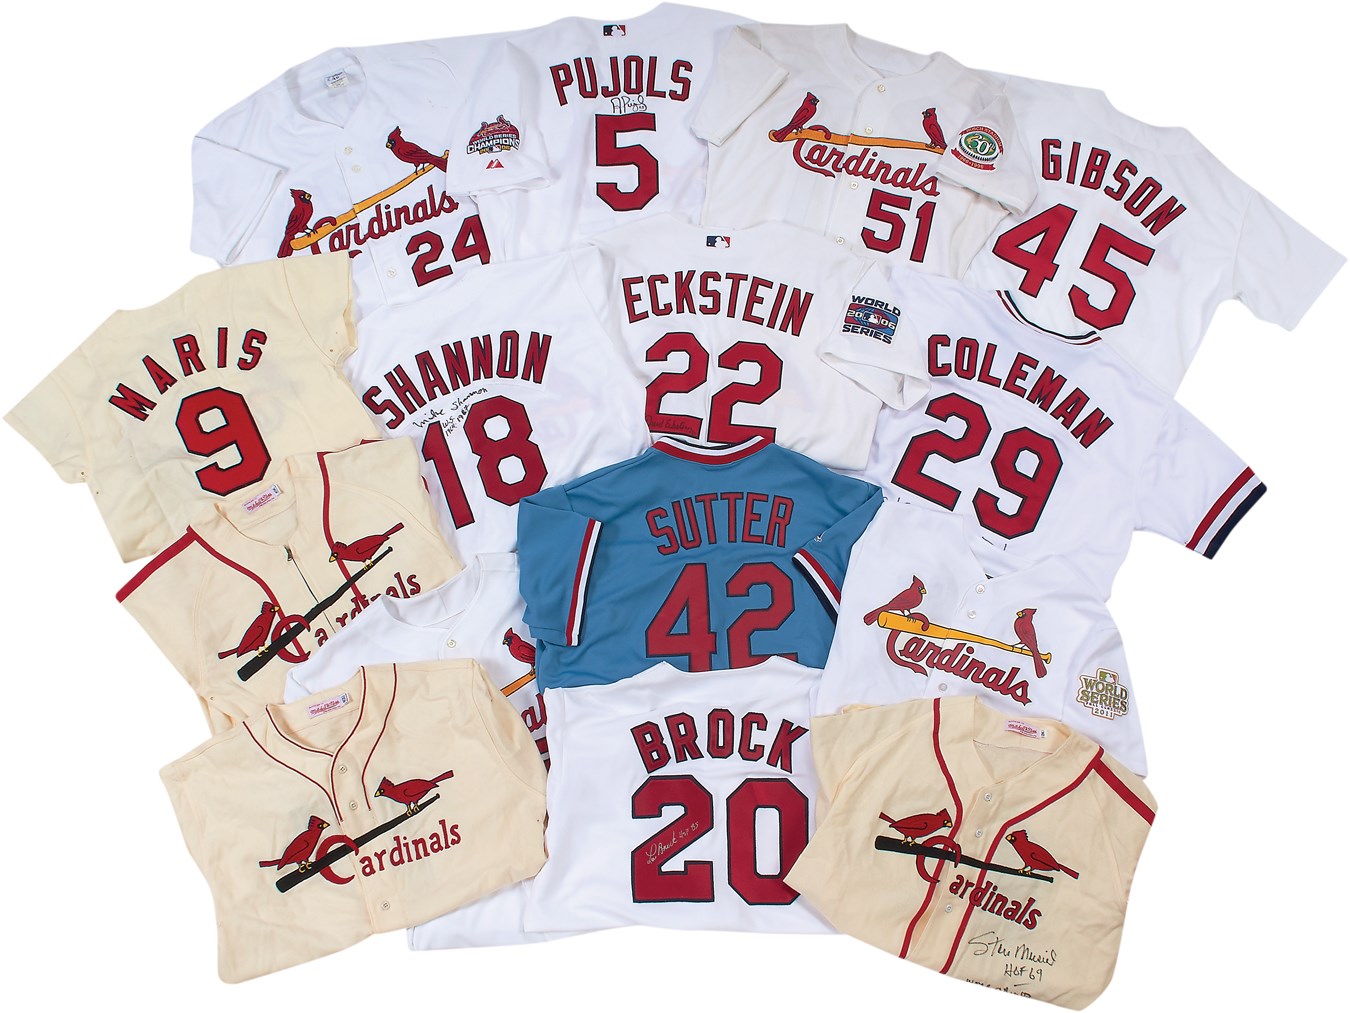 St. Louis Cardinals Greats Signed Jerseys with Stan Musial (16)